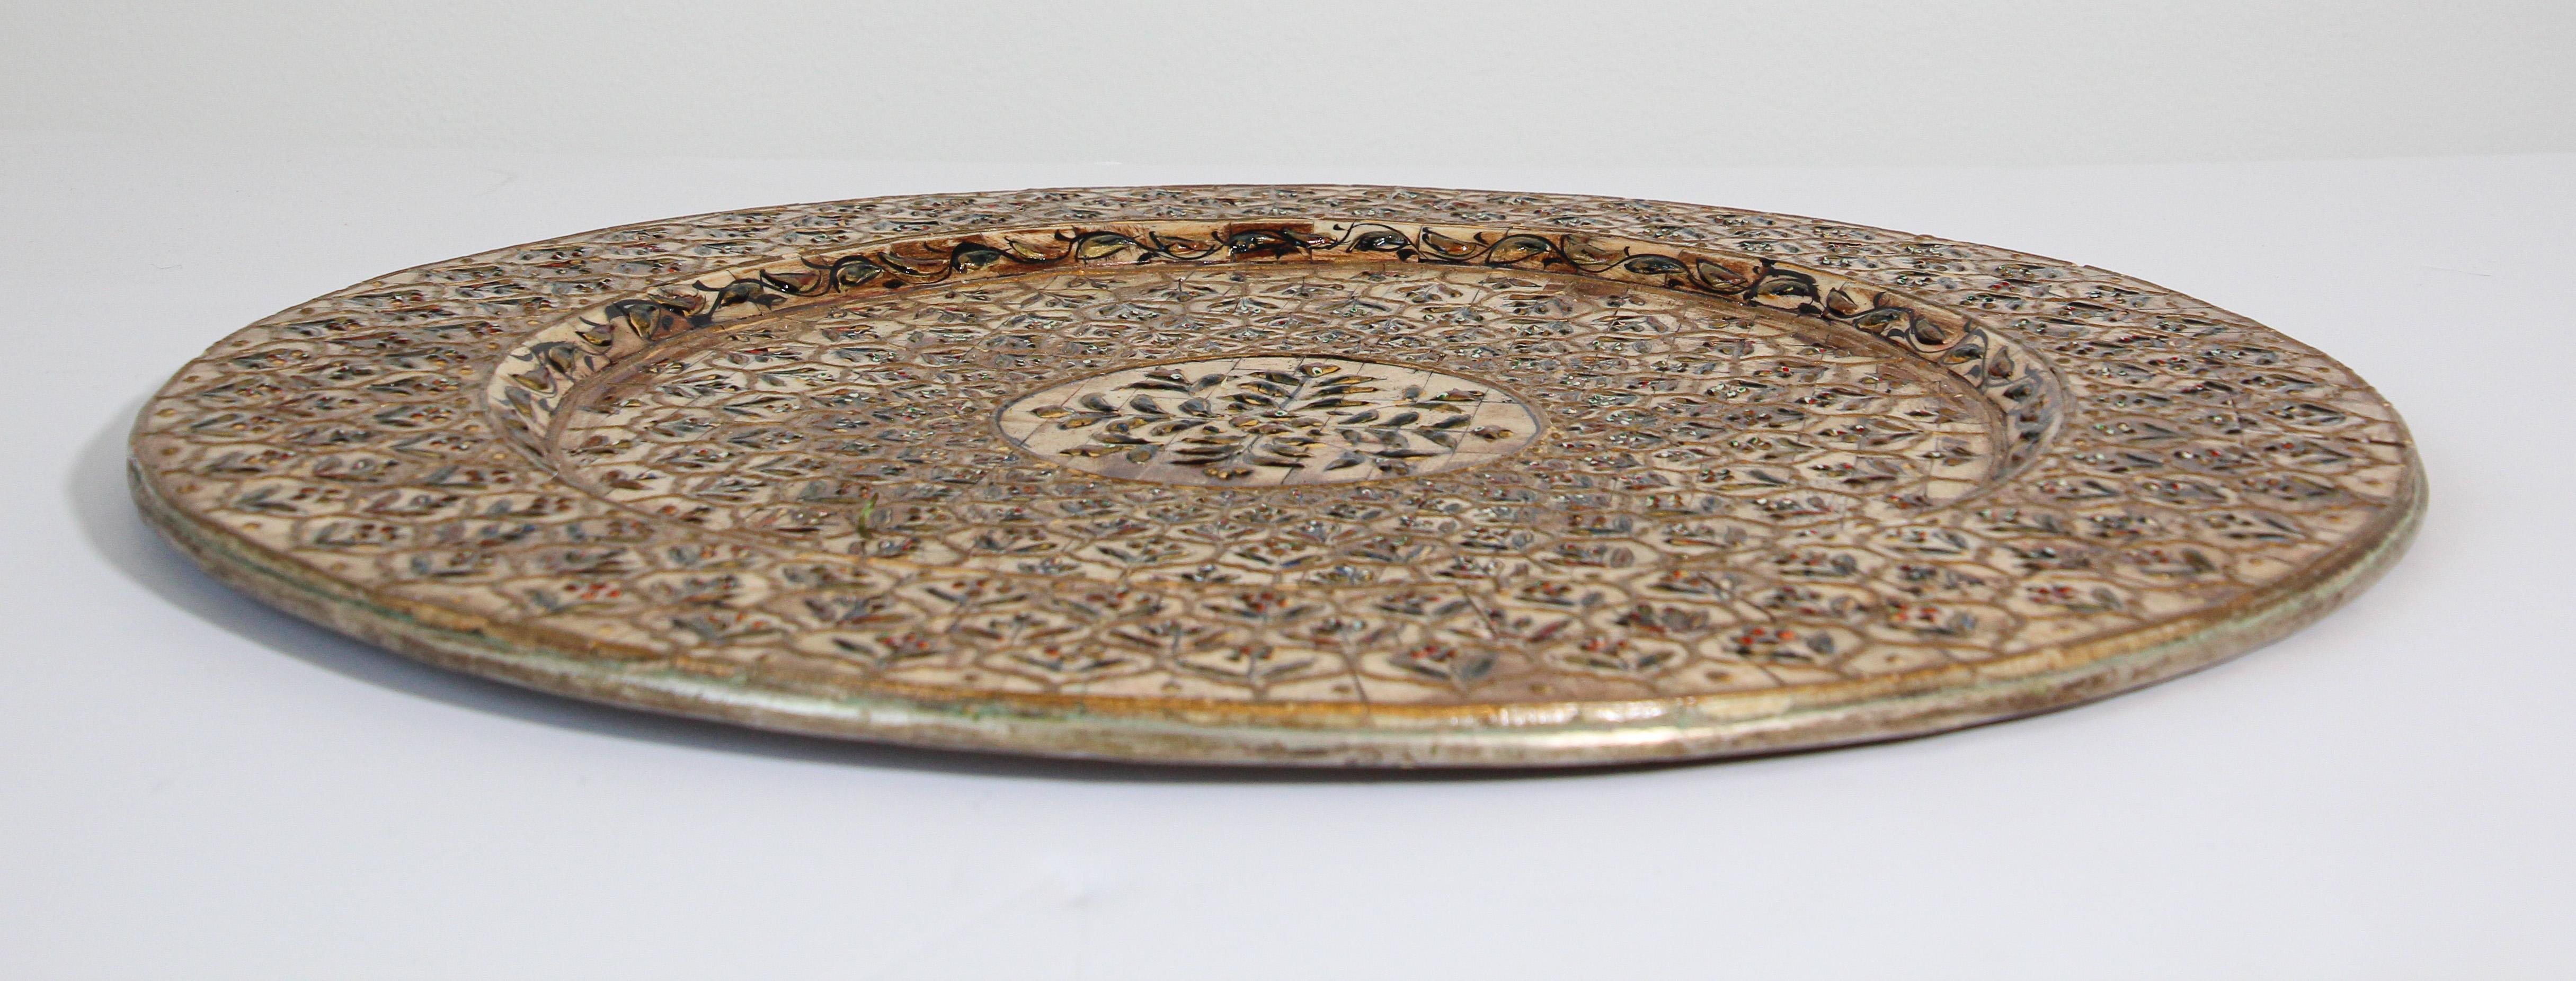 20th Century Indian Mughal style Overlaid and Hand Painted Metal Platter For Sale